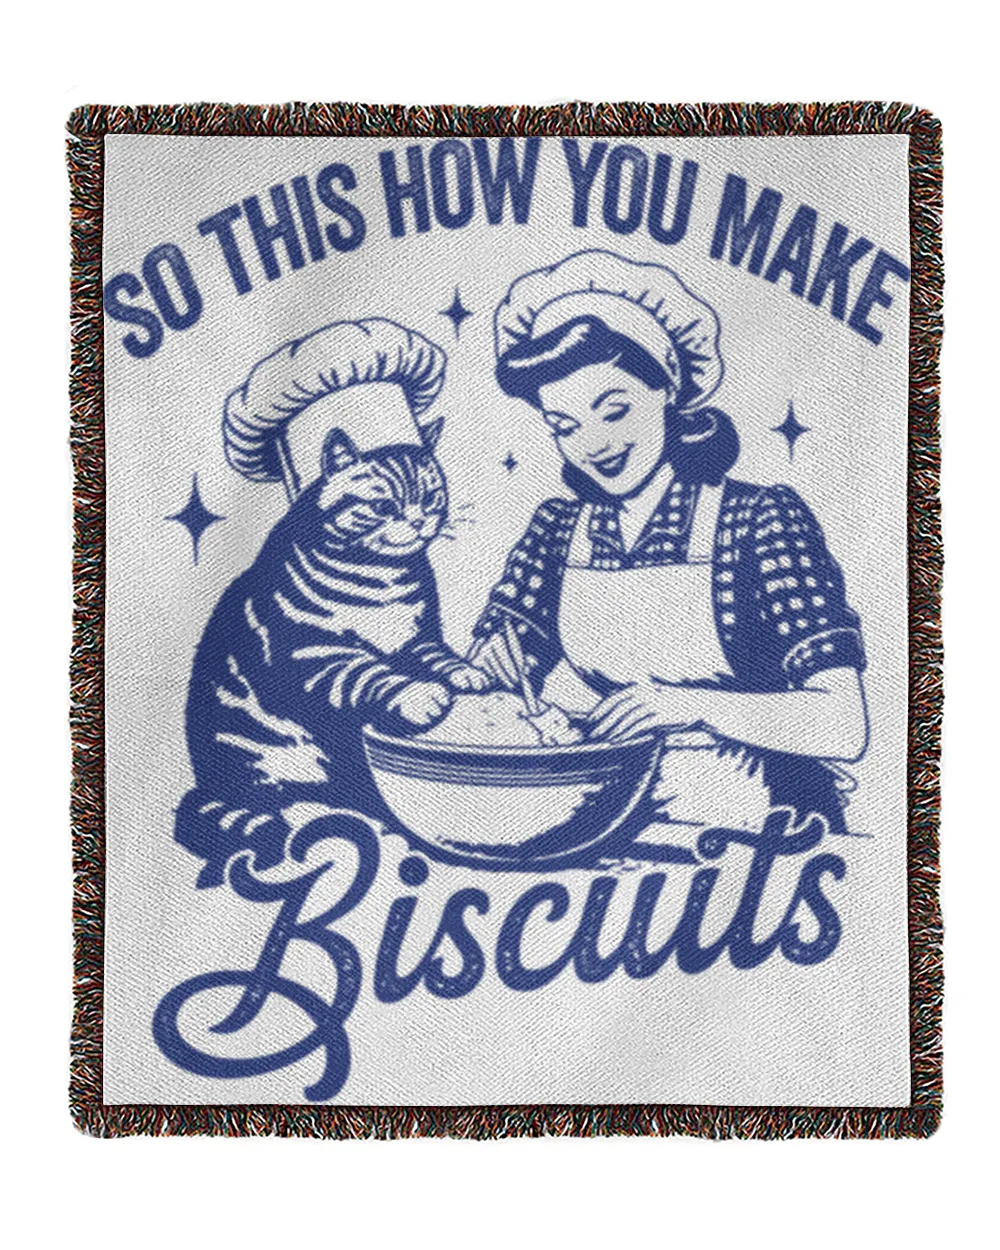 So This Is How You Make Biscuits Graphic T-Shirt, Retro Unisex Adult T Shirt, Vintage Baking T Shirt, Nostalgia